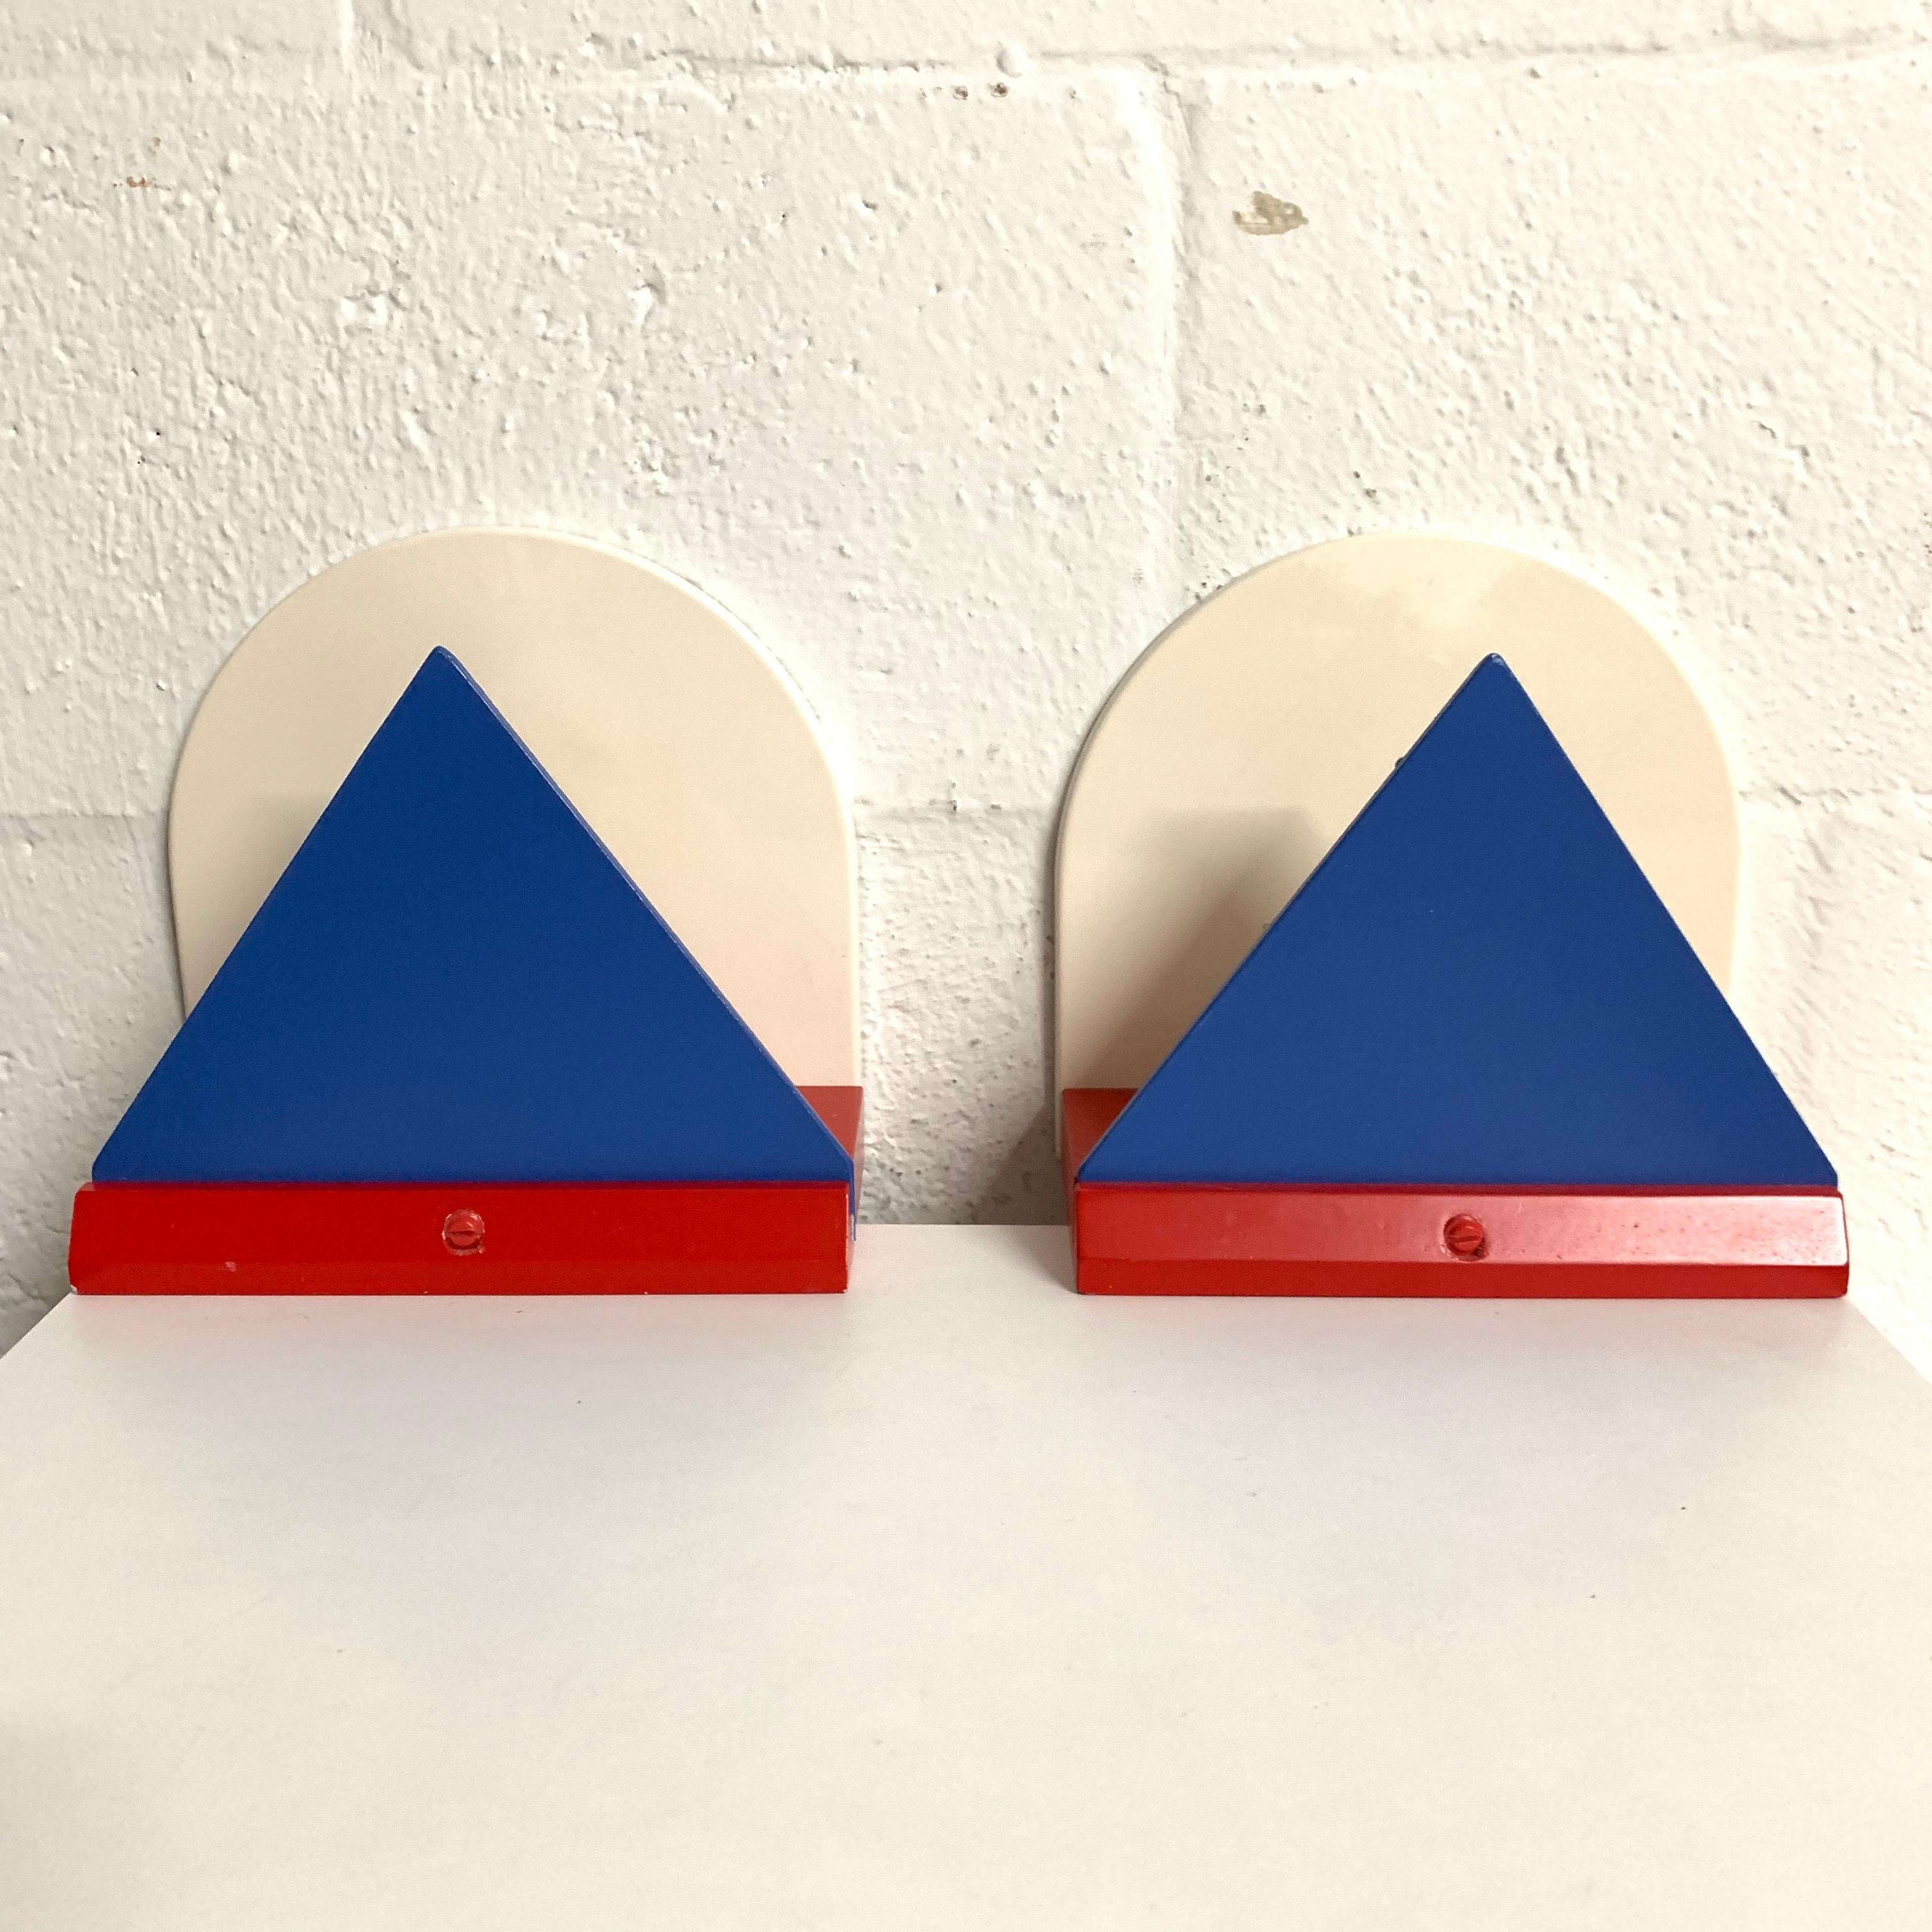 Pair of geometric postmodern wall lights lamps or sconces rendered in metal wood and plastic in red white and blue primary colors, by Ikea, 1980s.